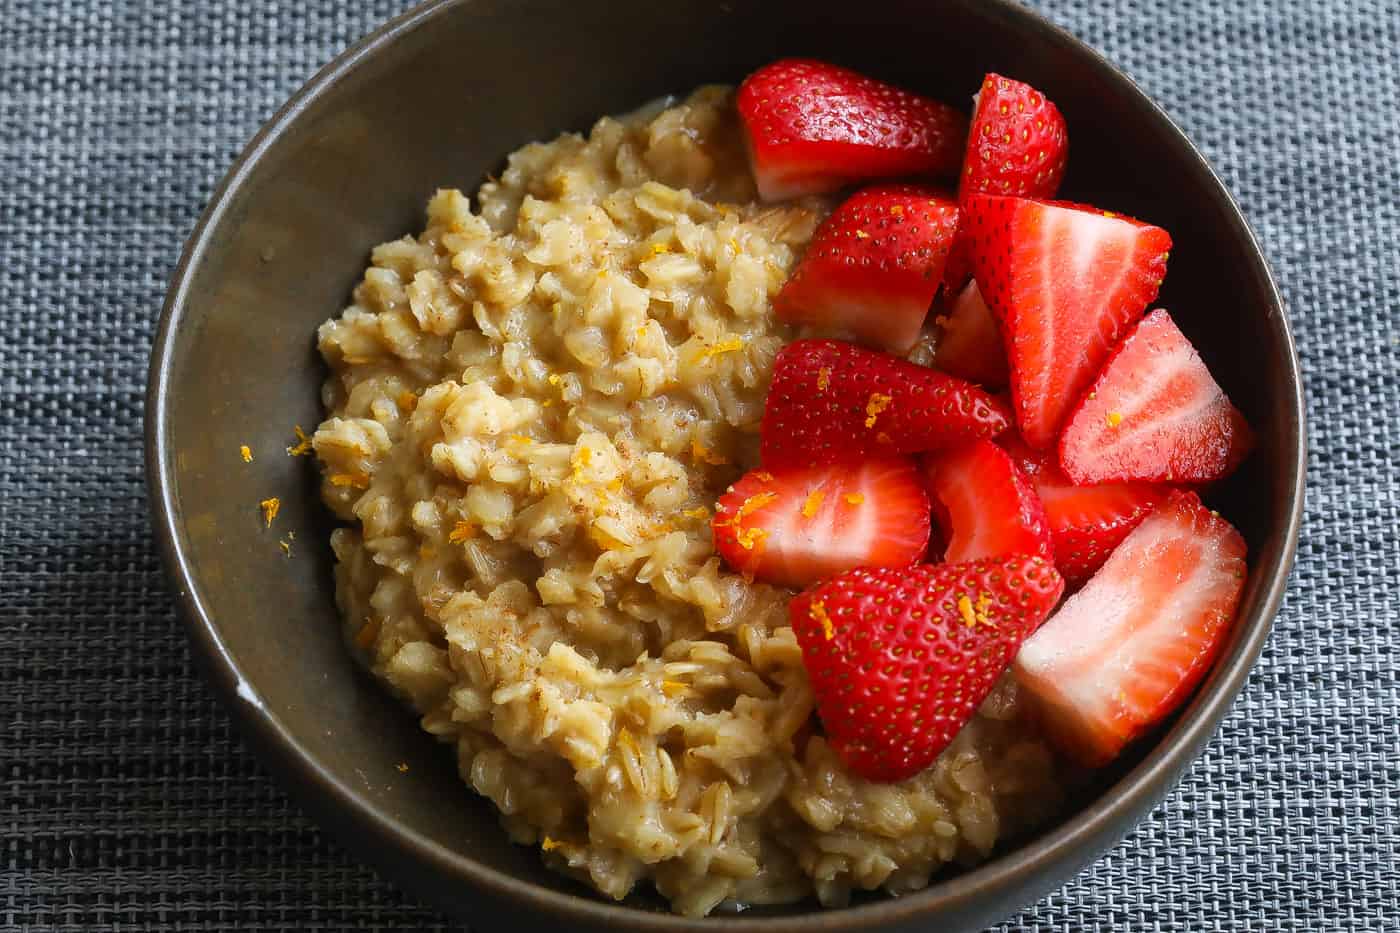 Strawberry Oatmeal cooked in Orange Juice